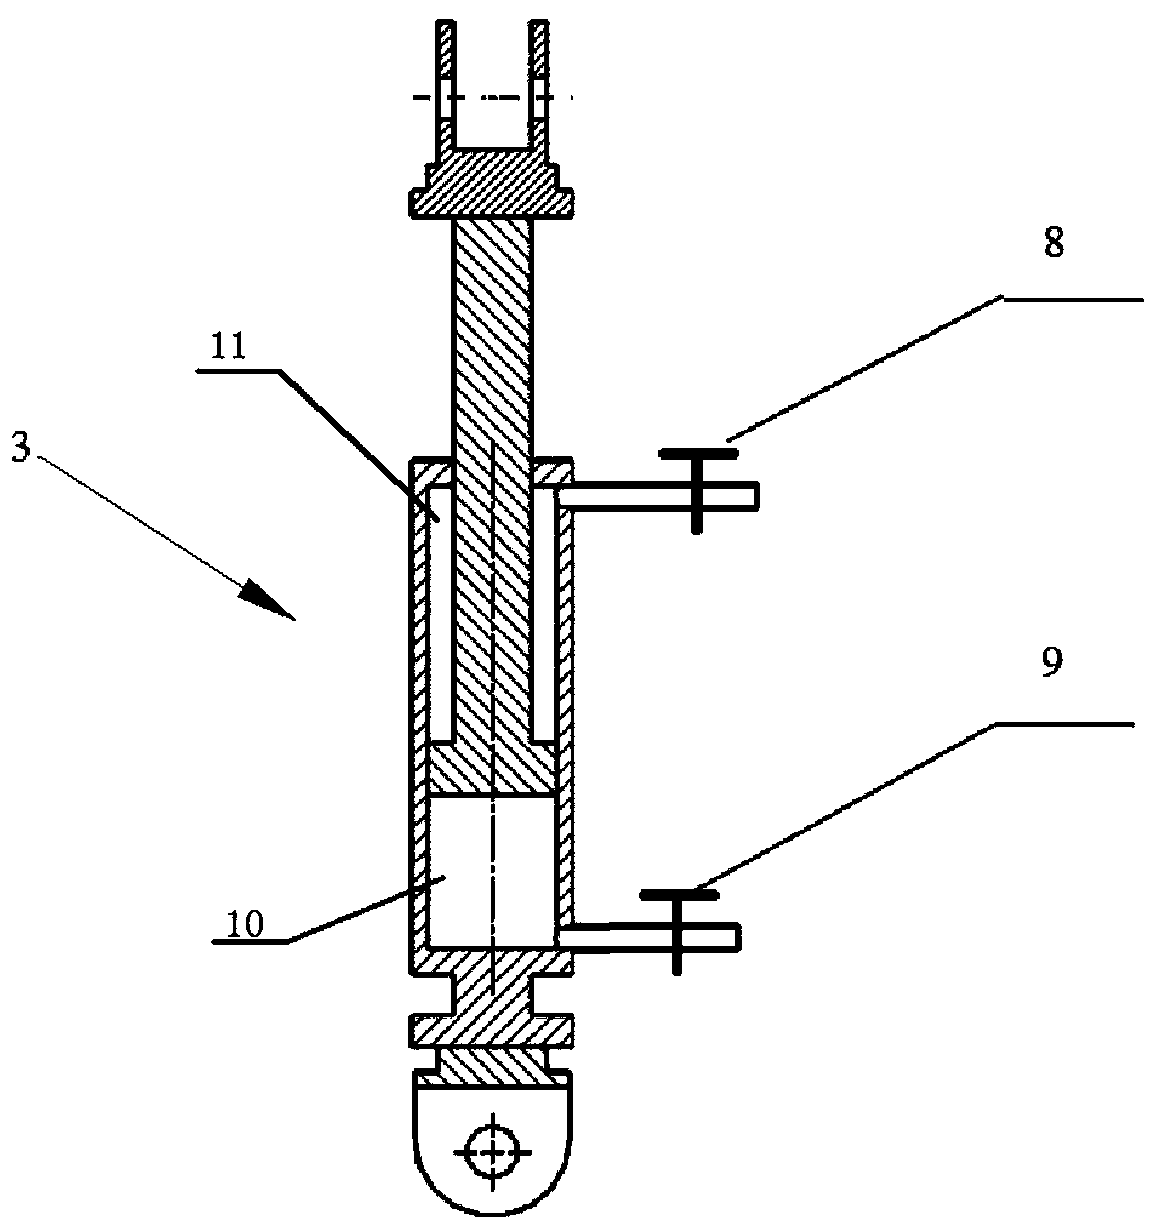 A steward type universal wave energy conversion device